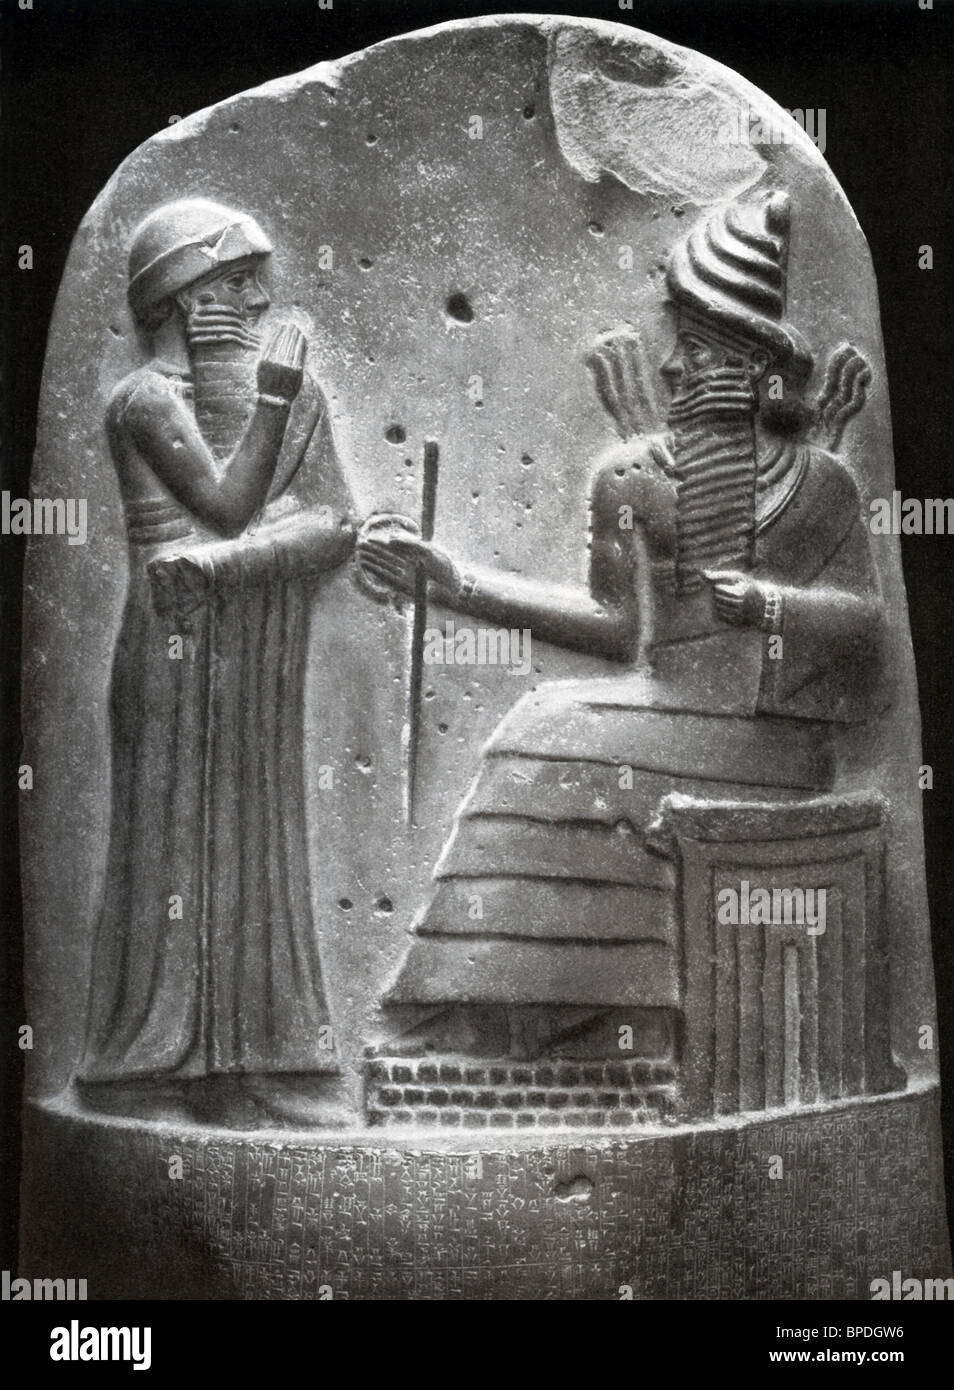 The sculpted figure at left is Hammurabi, standing before Shamash, the sun god and Lord of Judgment. Stock Photo